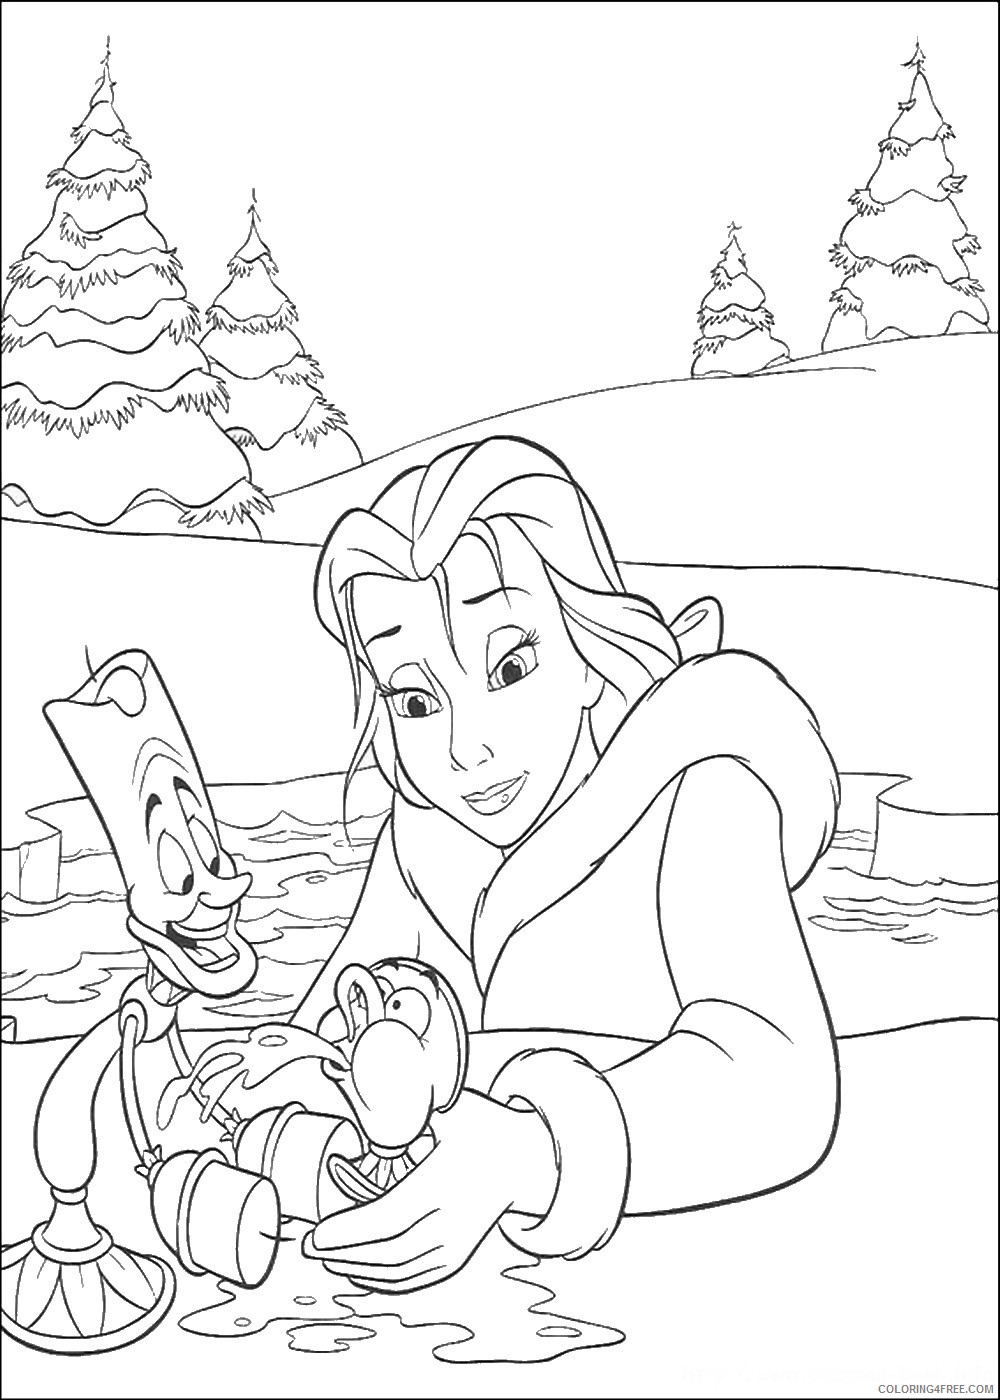 Beauty and the Beast Coloring Pages Cartoons the_beauty_beast_cl_15 Printable 2020 1187 Coloring4free